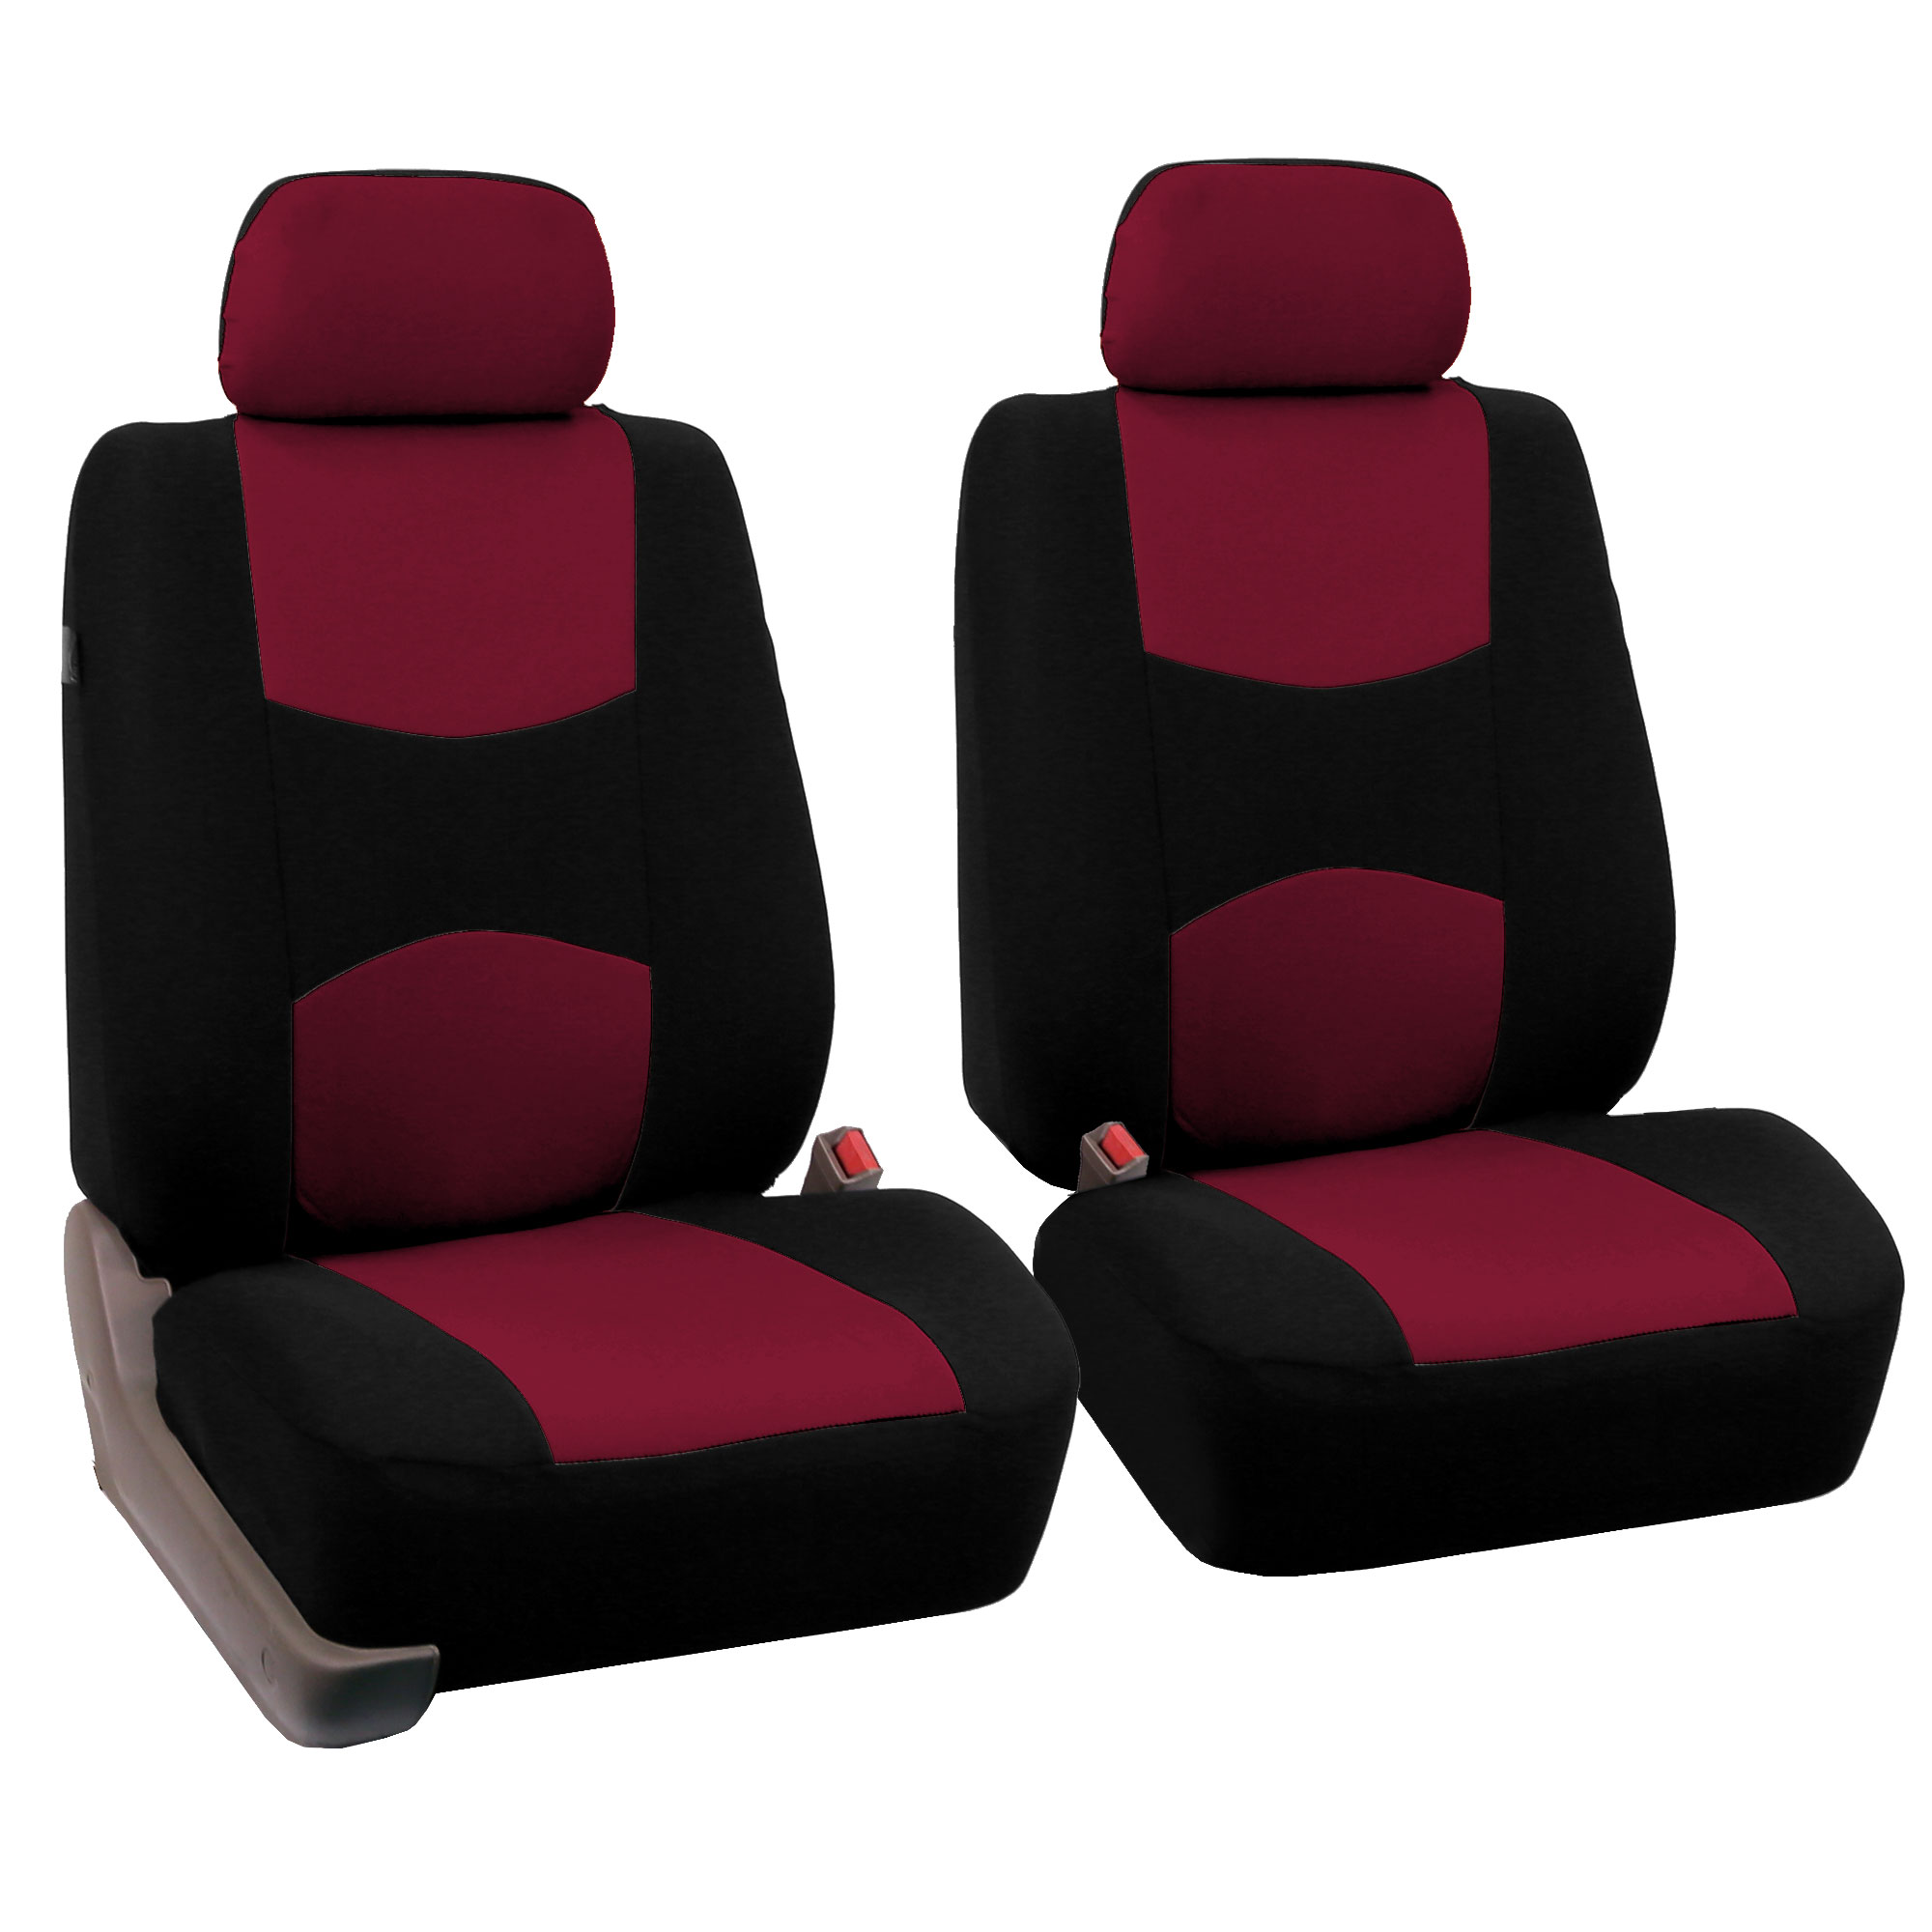 FH Group Universal Flat Cloth Fabric 2 Headrests Full Set Car Seat Cover, Burgundy and Black - image 2 of 3